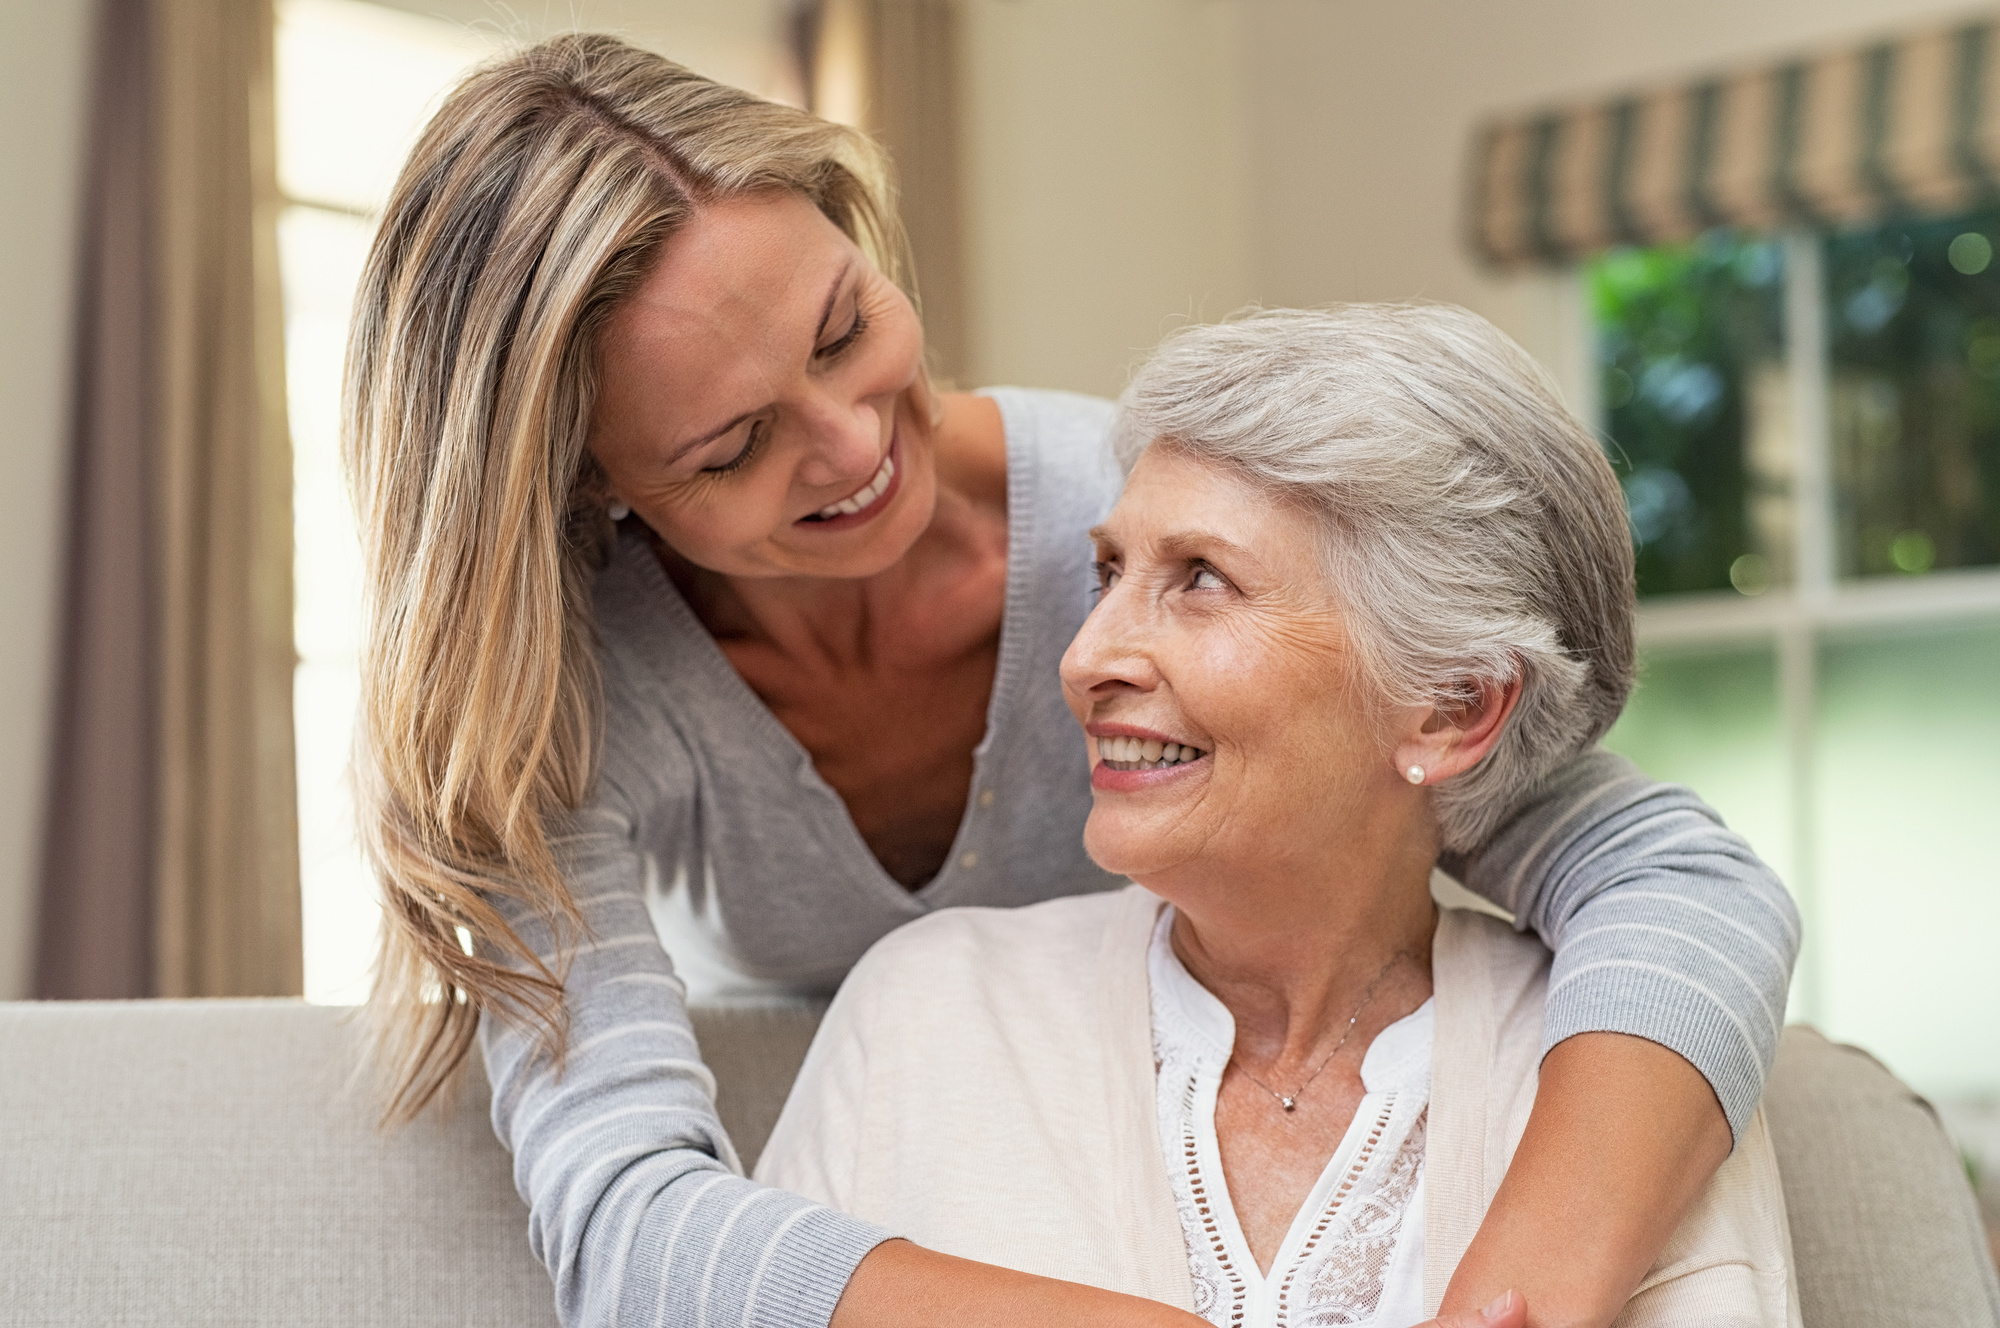 Caring for aging parents can be challenging, but we're here to help make things easier. Check out this guide for our greatest tips.